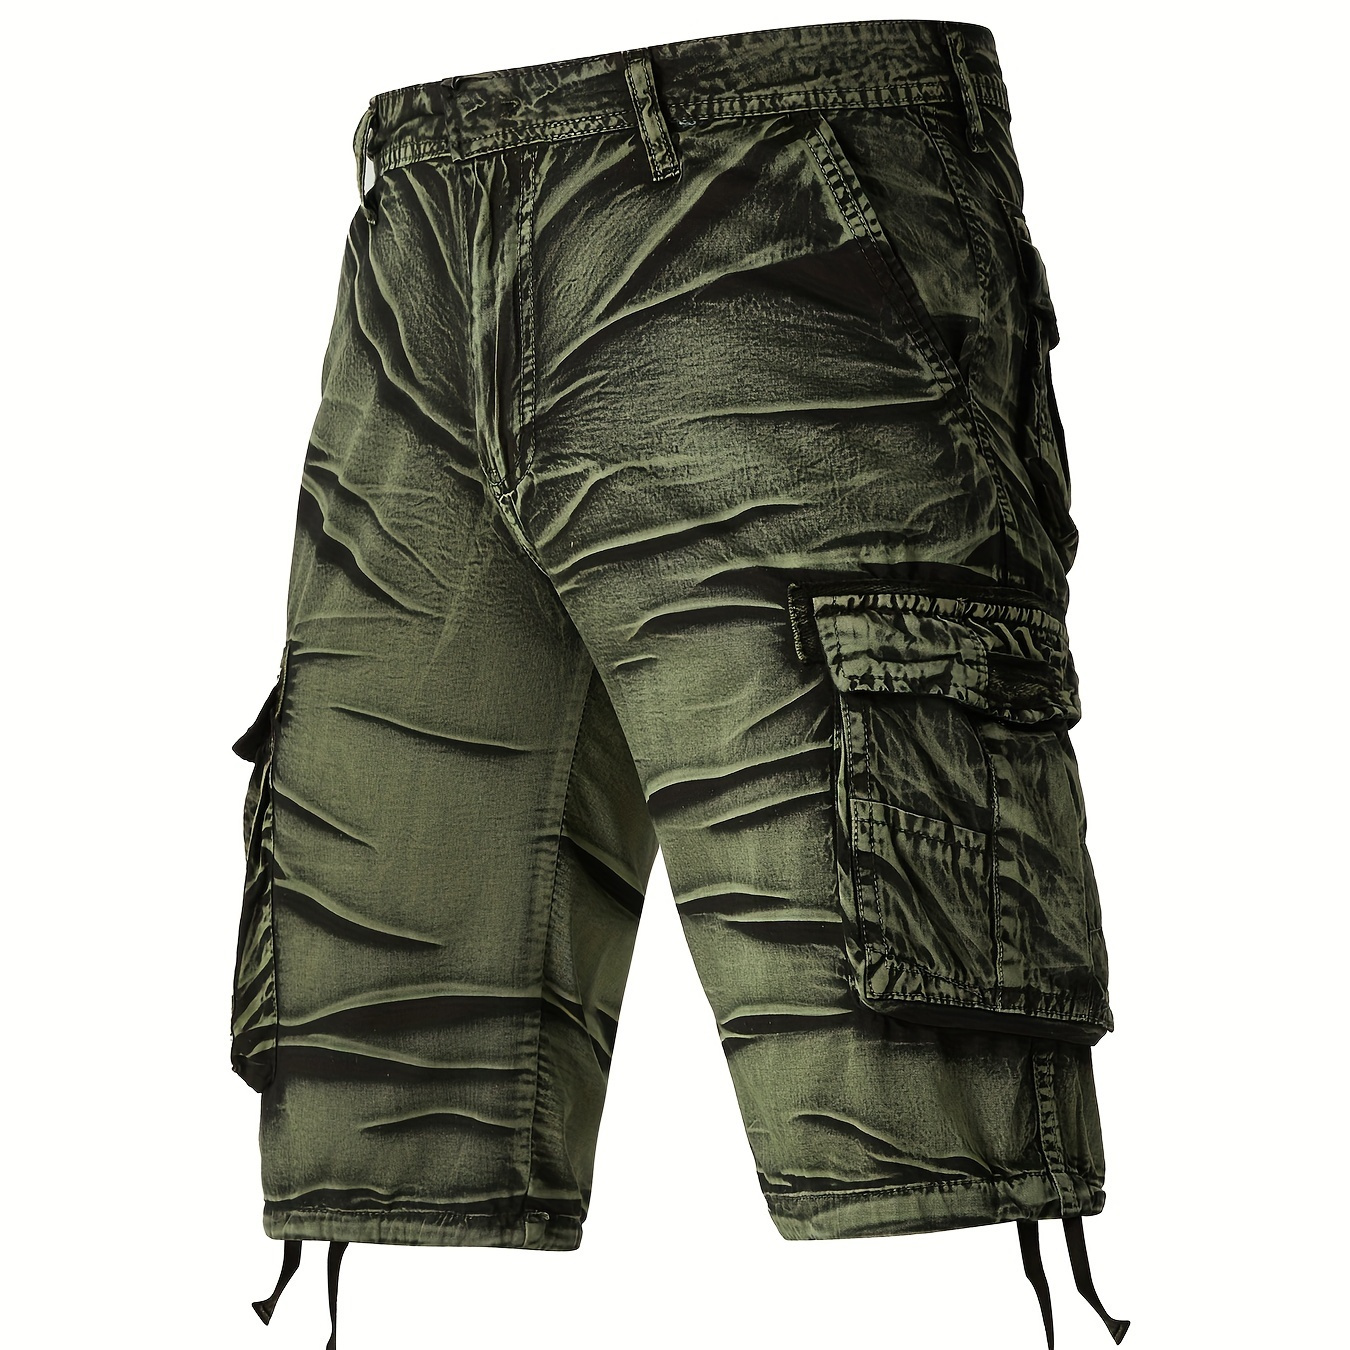 

Camo Pattern Cotton Breathable Men's Embroidery Cargo Short Pants, Lightweight Flap Pocket Loose Trendy Shorts, Men's Work Pants Outdoors For Hiking Fishing